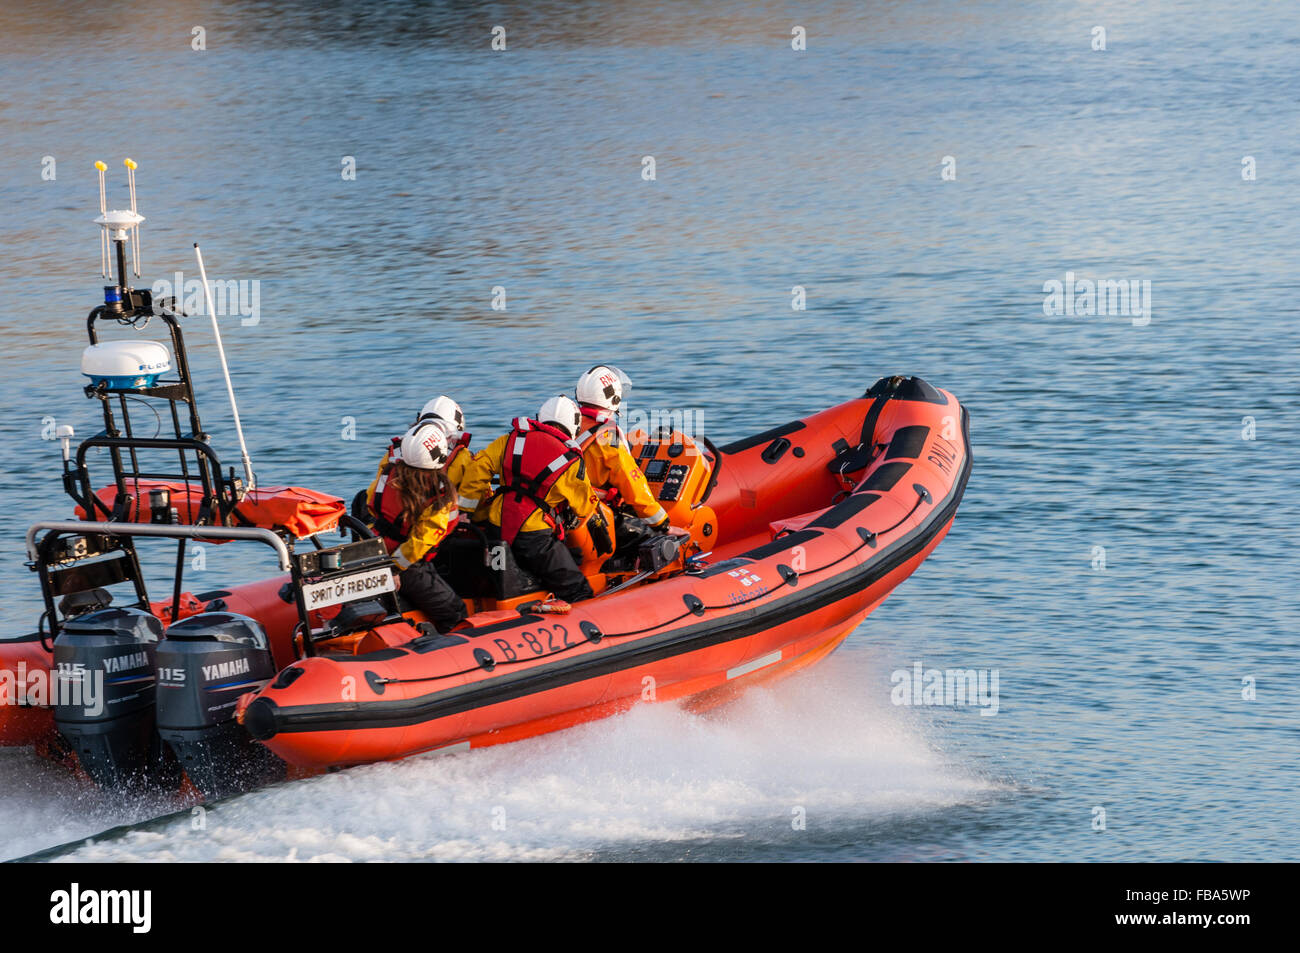 RNLI lifeboat heading out to sea at Aberystwyth, Wales. Stock Photo